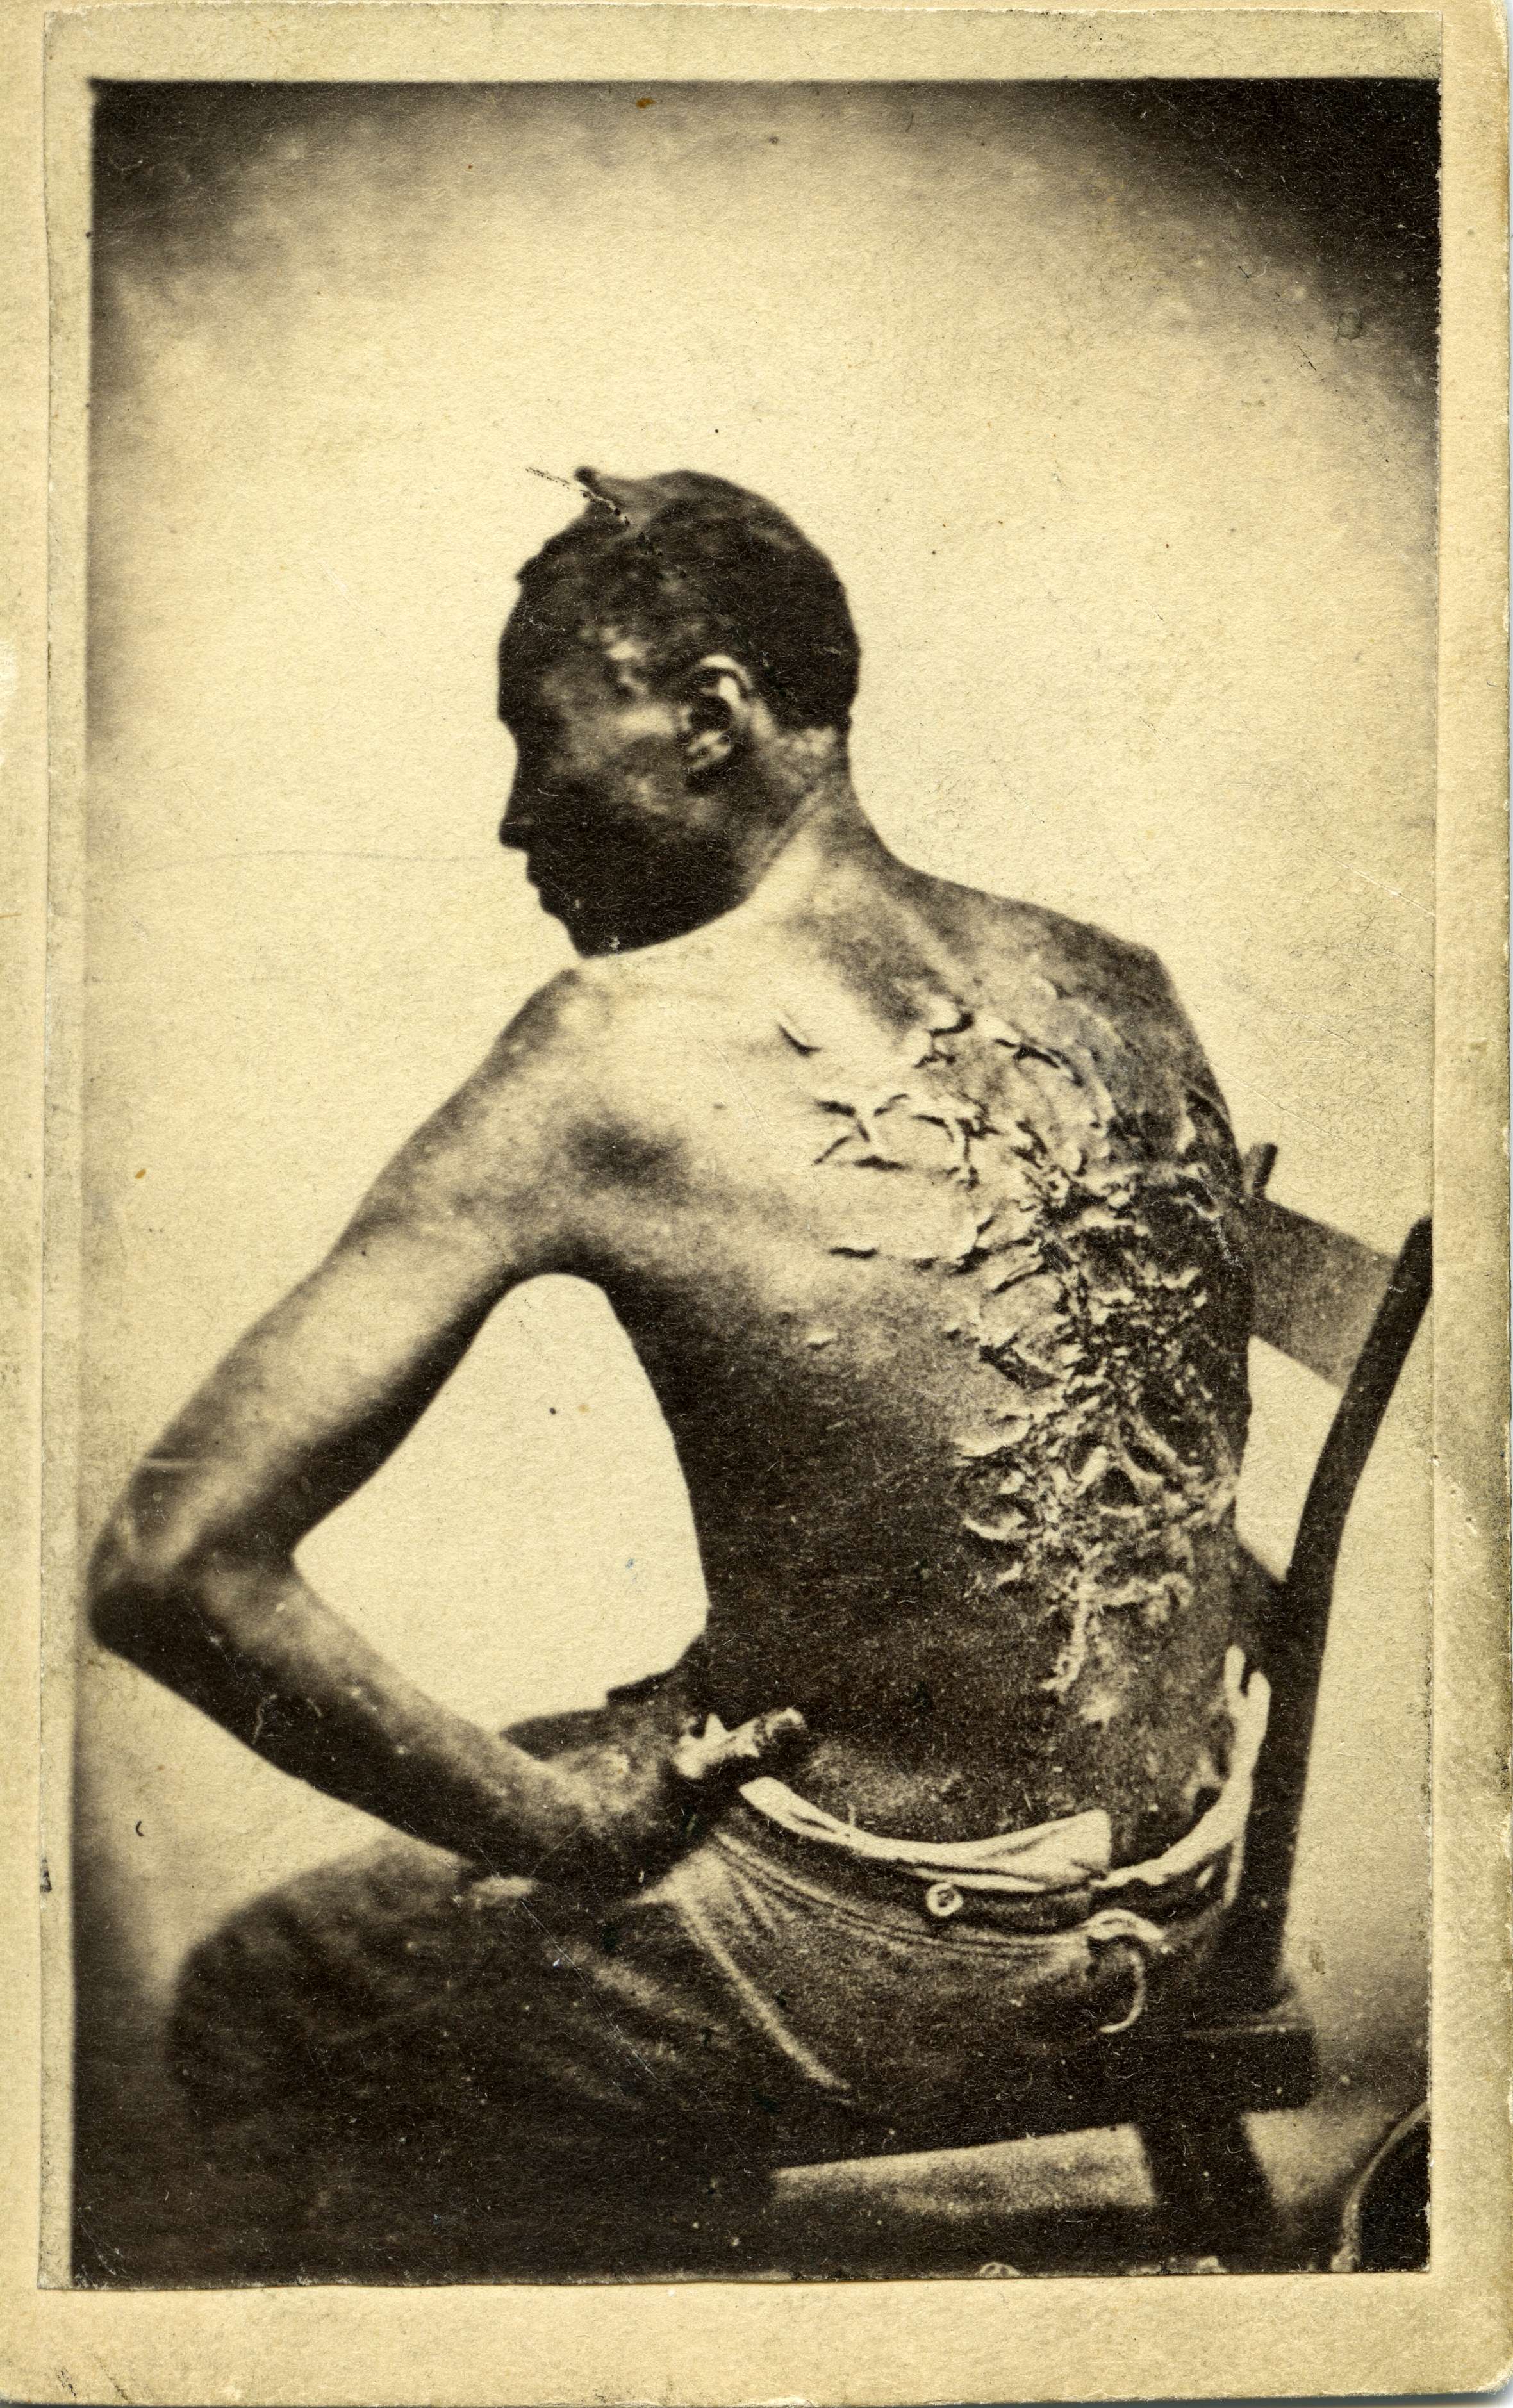 Photograph of Peter, a formerly enslaved man